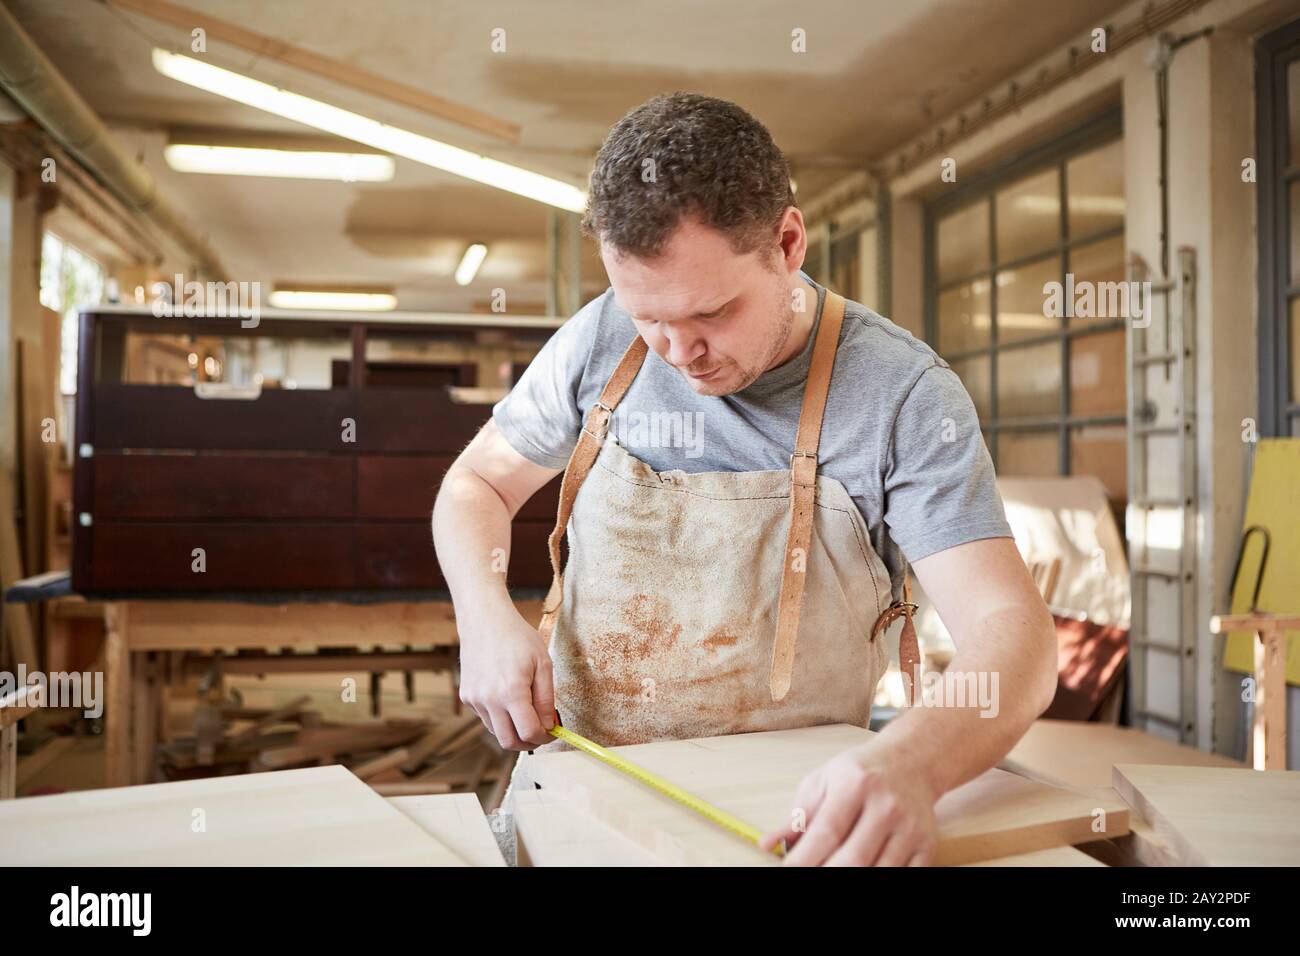 Carpenter apprentice as a furniture maker when measuring wood with a measuring tape Stock Photo